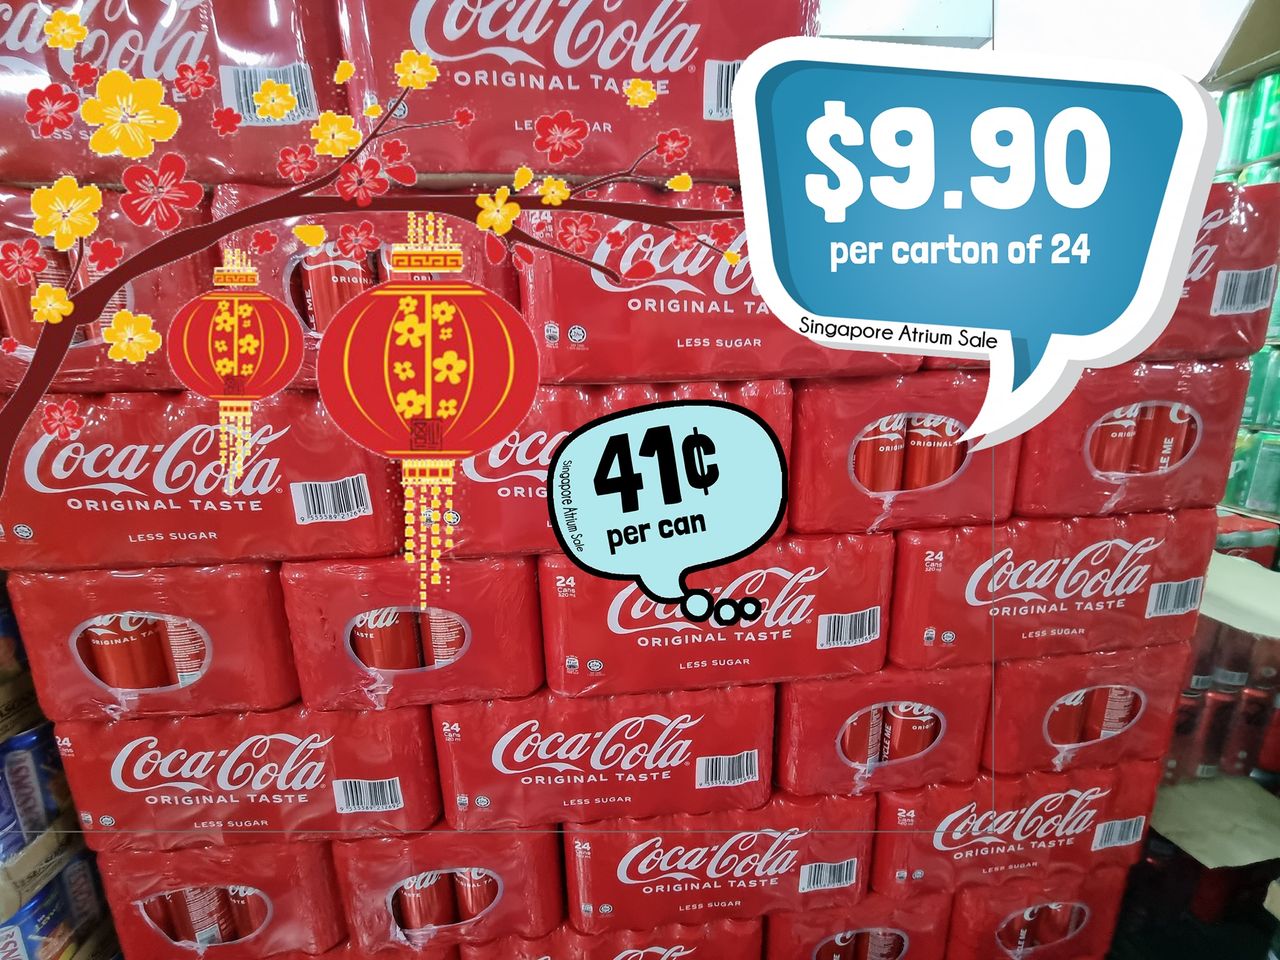 Don’t Say Bojio: Hidden CNY Drinks Sale Near Pioneer MRT Station With Coke at Less Than $0.50 Per Can - 1